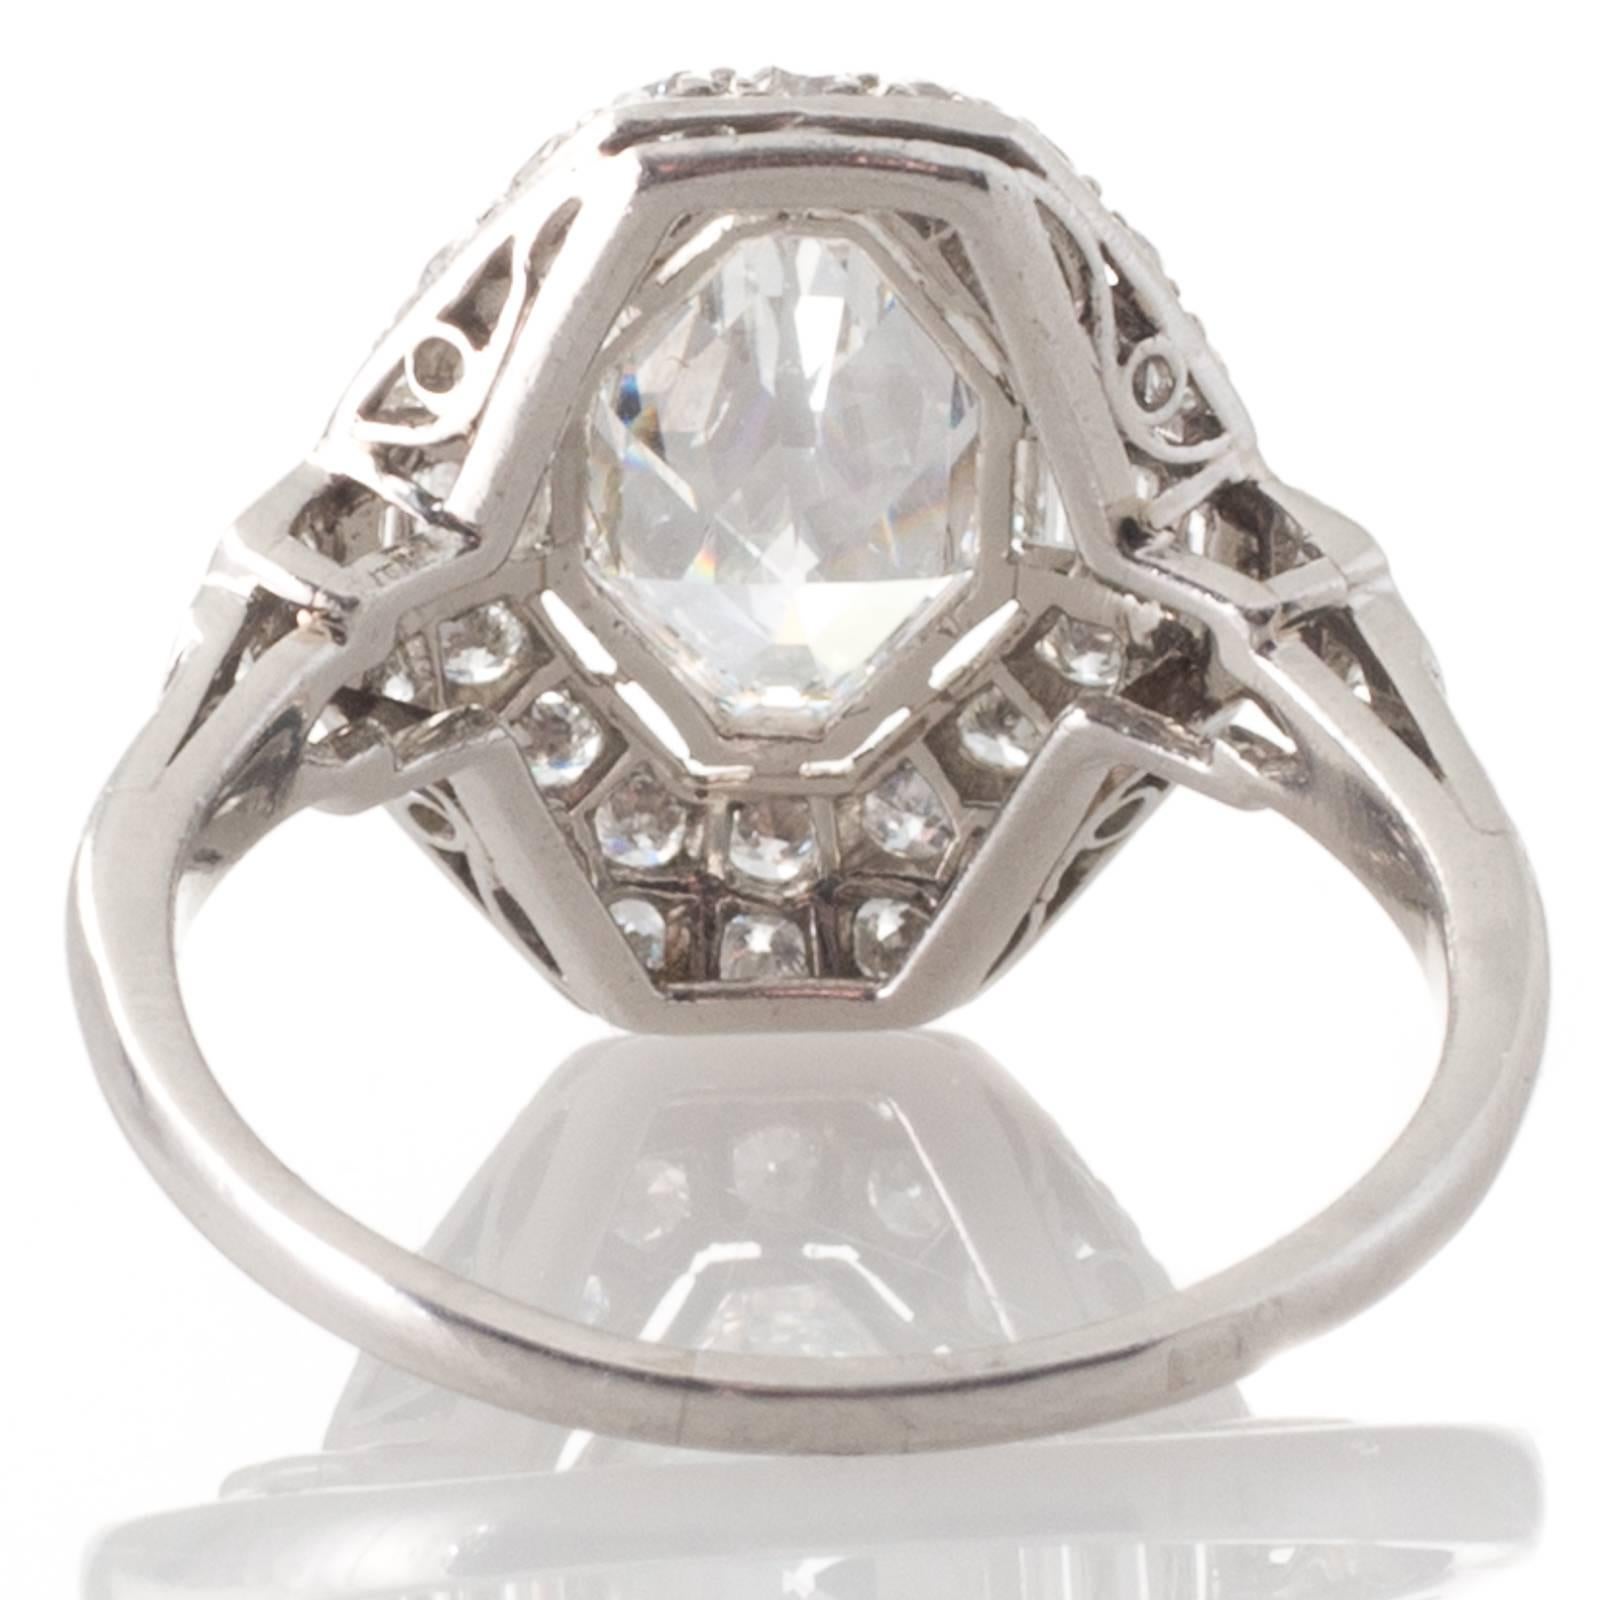 A French platinum plaque ring featuring a bezel set modified baroness cut diamond of estimated weight 1.00ct graded colour H-I clarity VS1 surrounded by thirty two grain set early modern brilliant cut diamonds and six channel set baguette cut